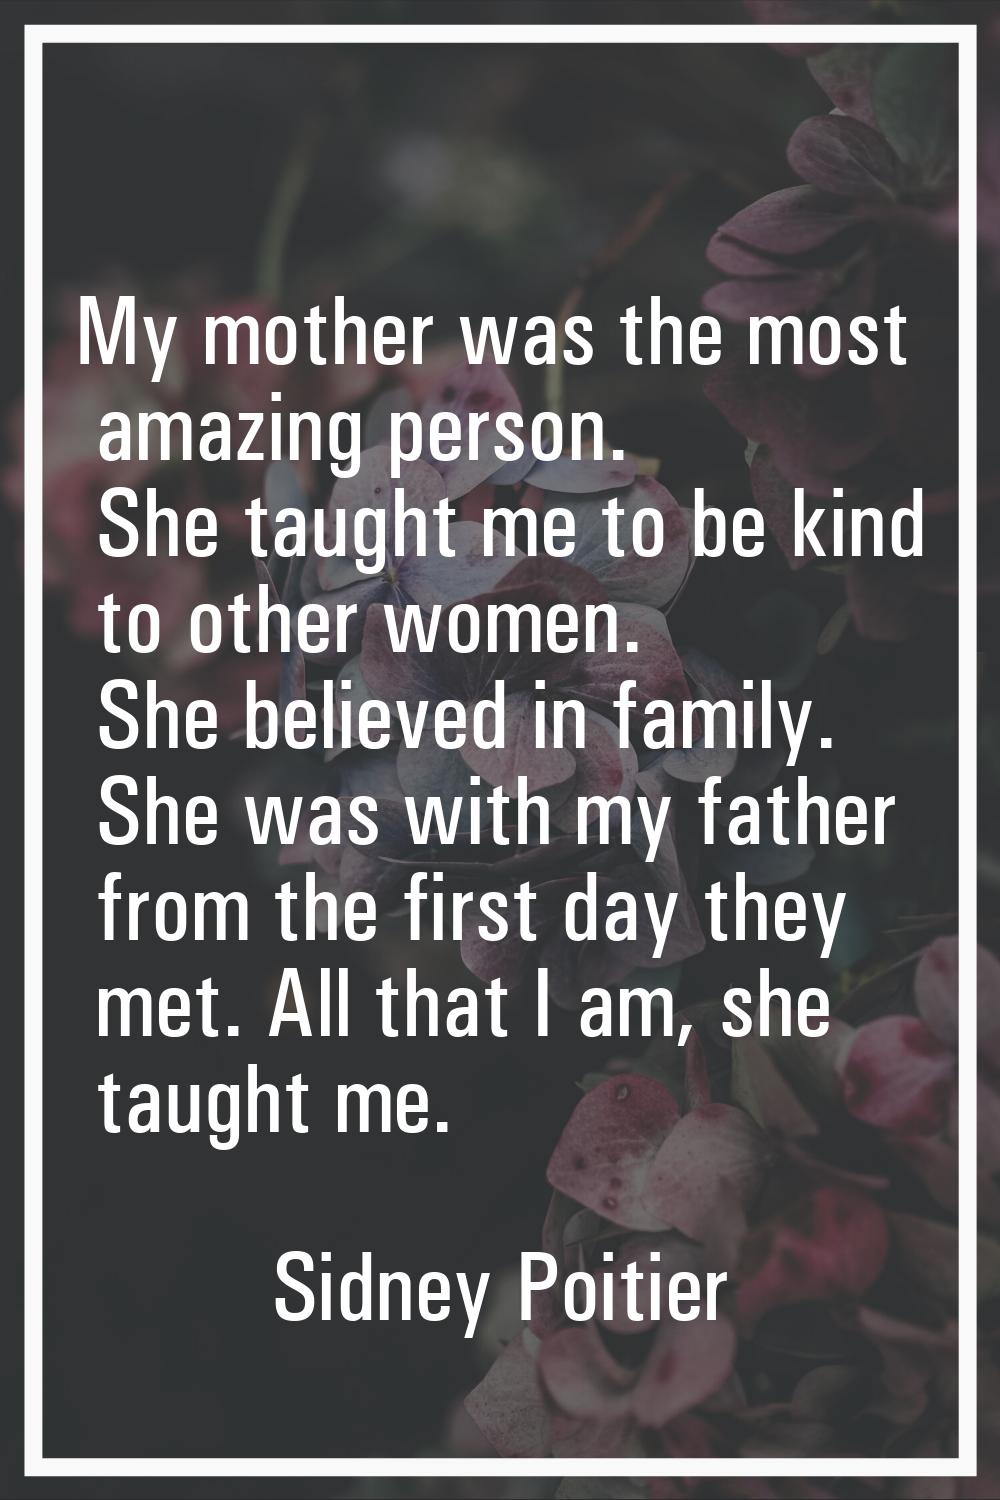 My mother was the most amazing person. She taught me to be kind to other women. She believed in fam